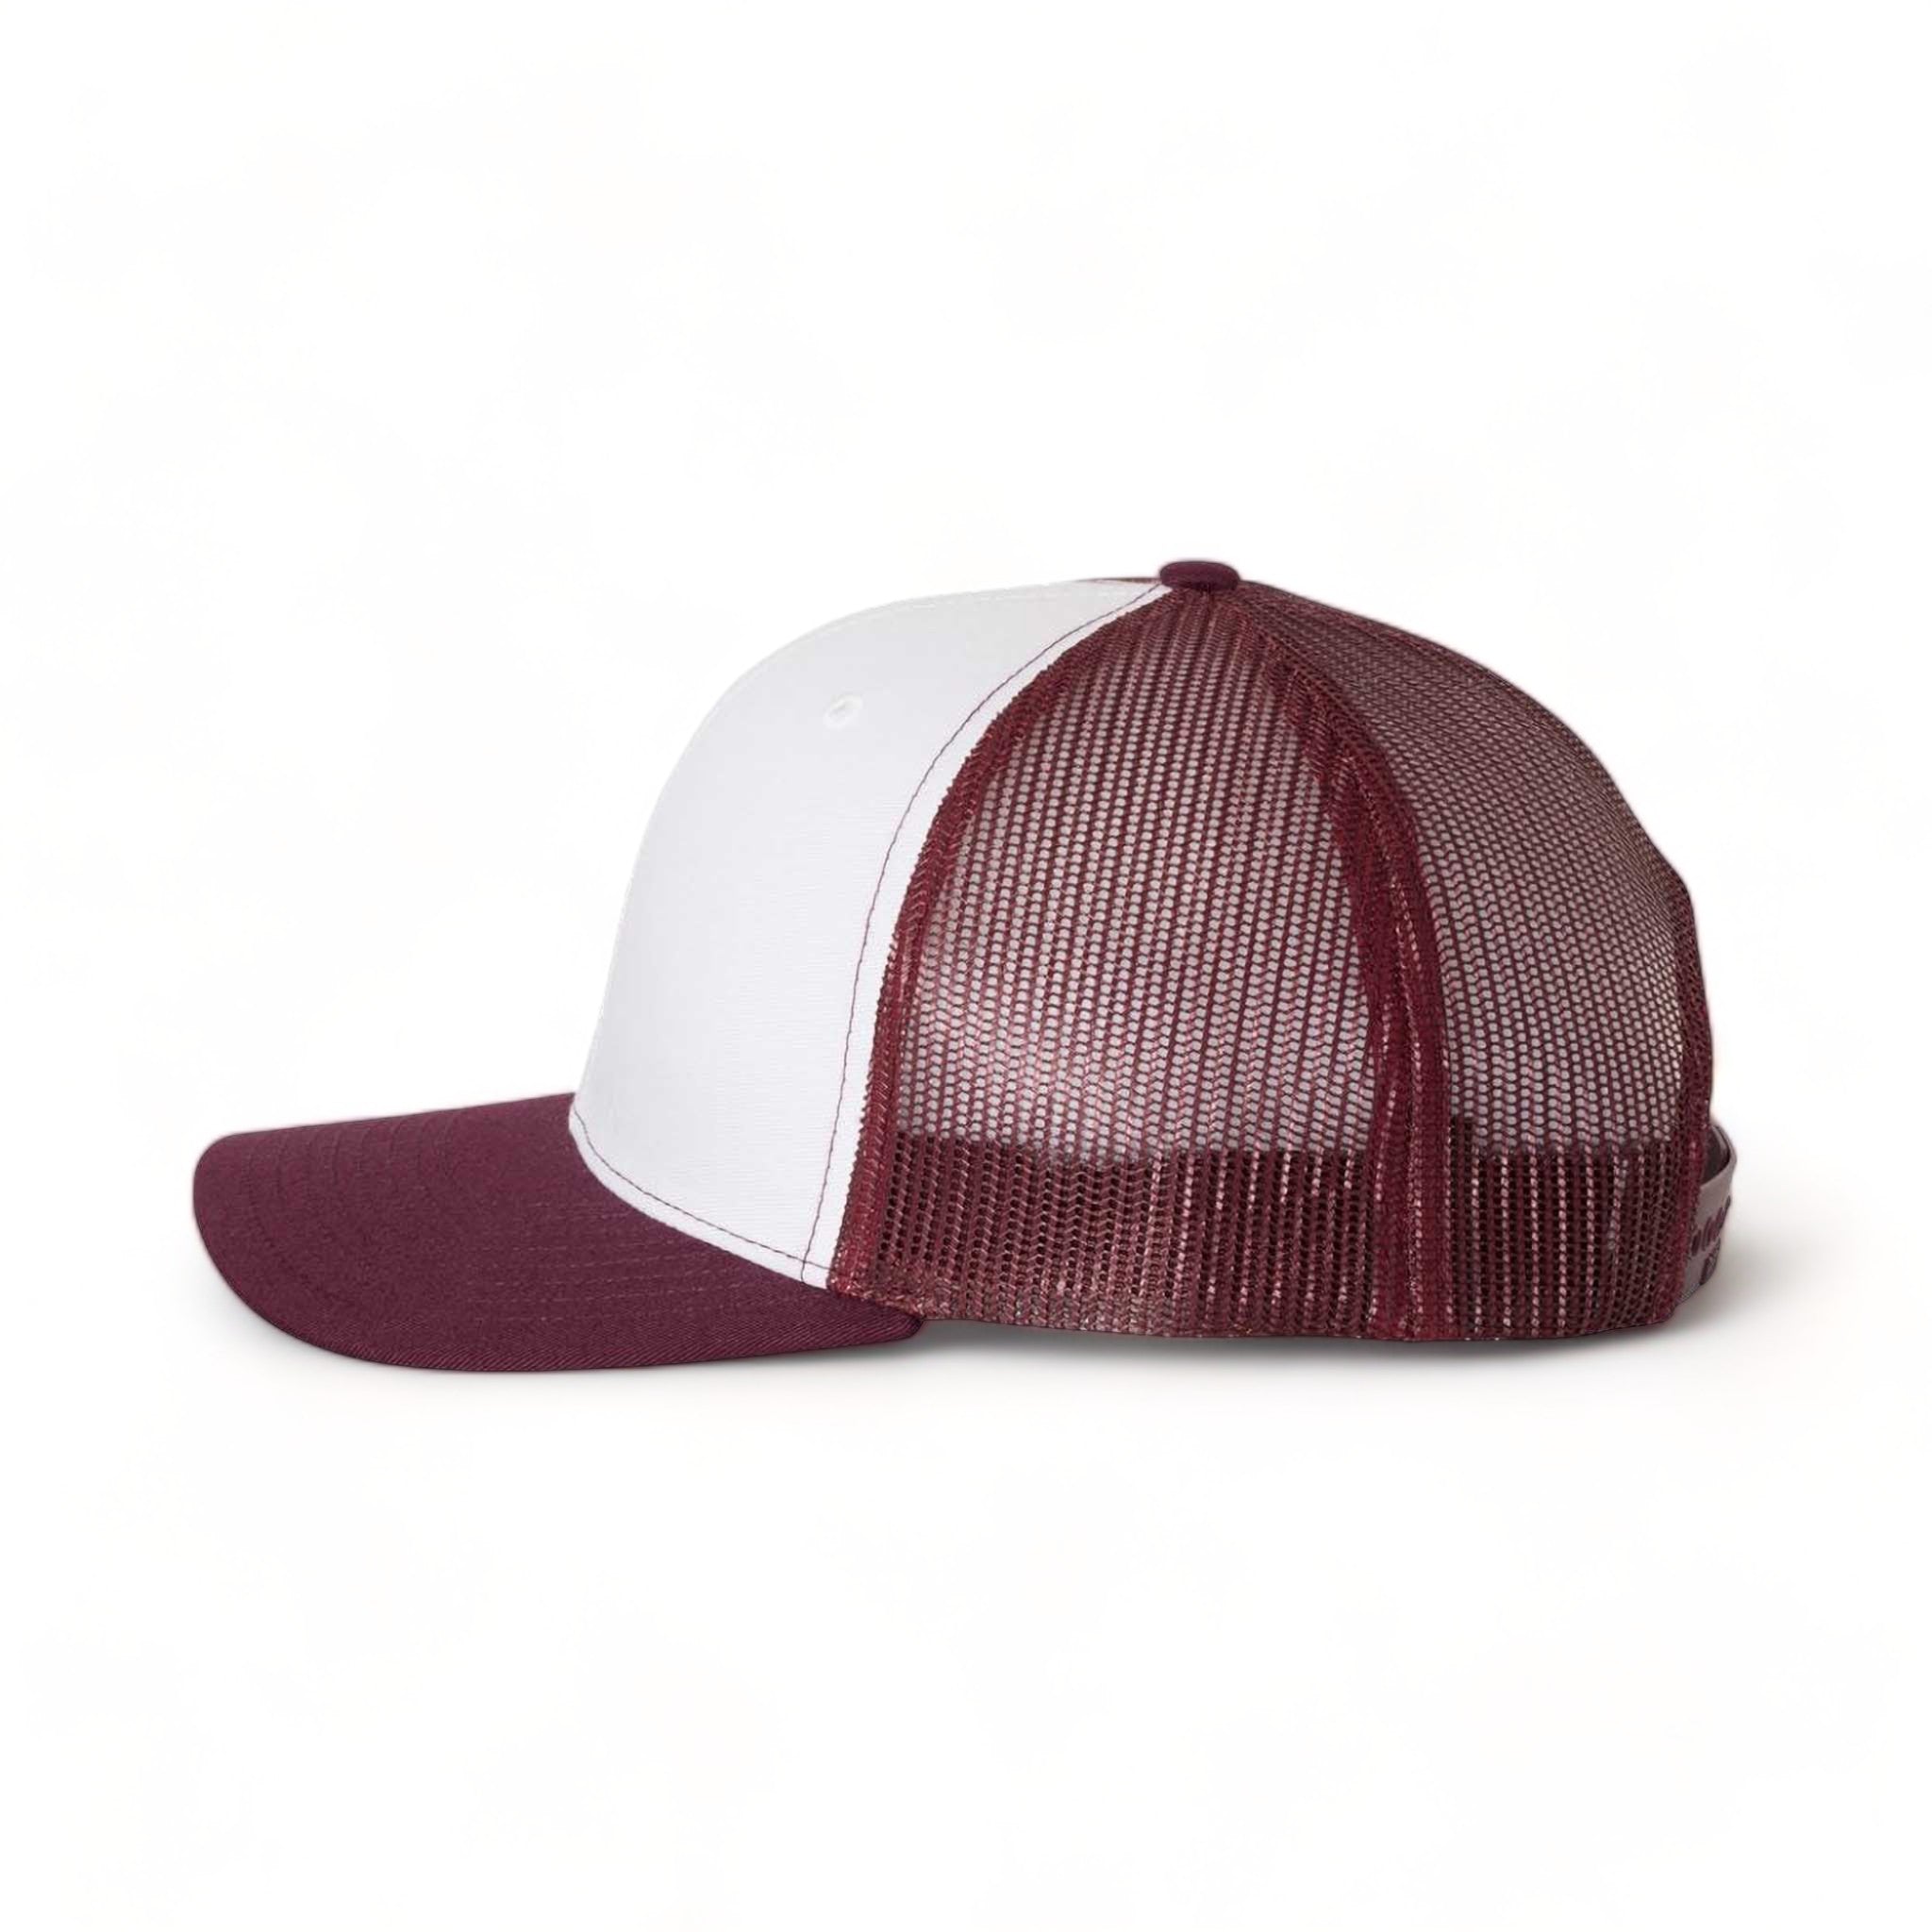 Side view of Richardson 112 custom hat in white and maroon